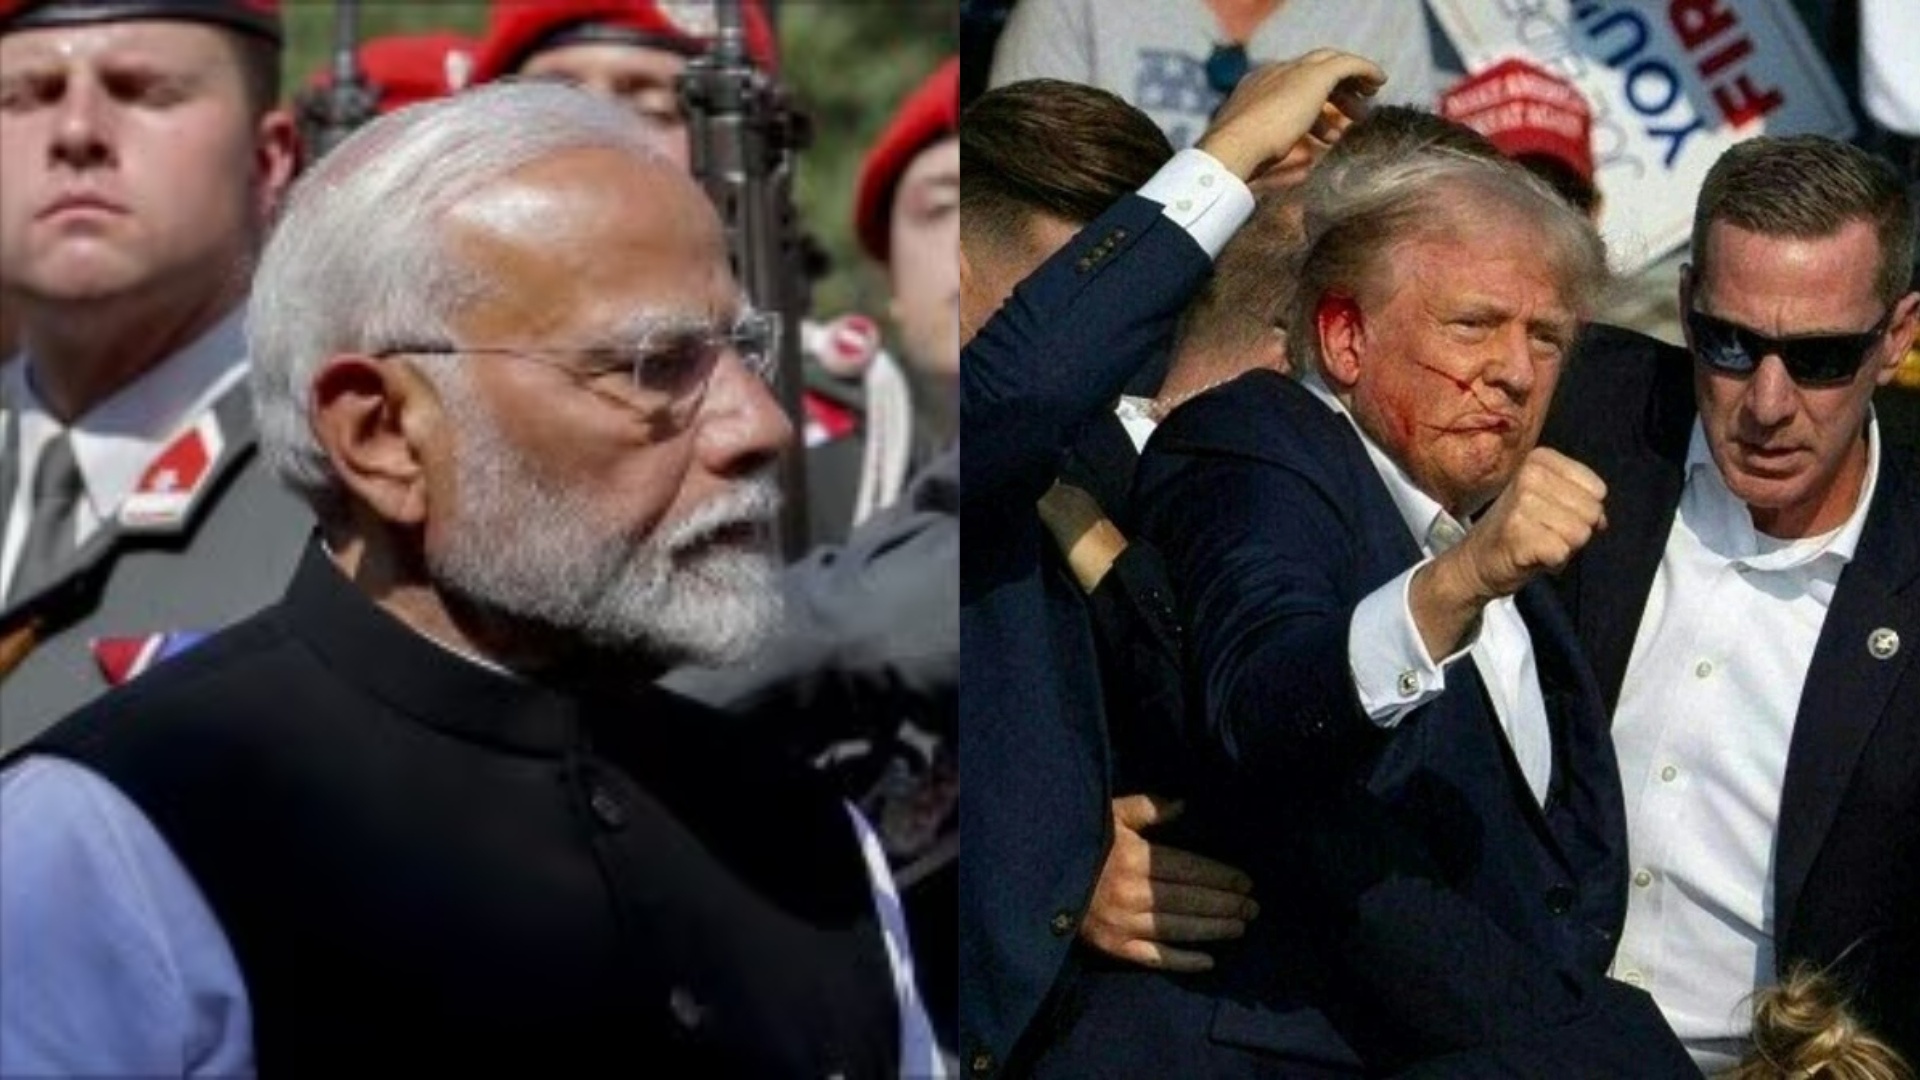 From PM Modi To Joe Biden, Global Reactions To Assasination Attempt On Donald Trump